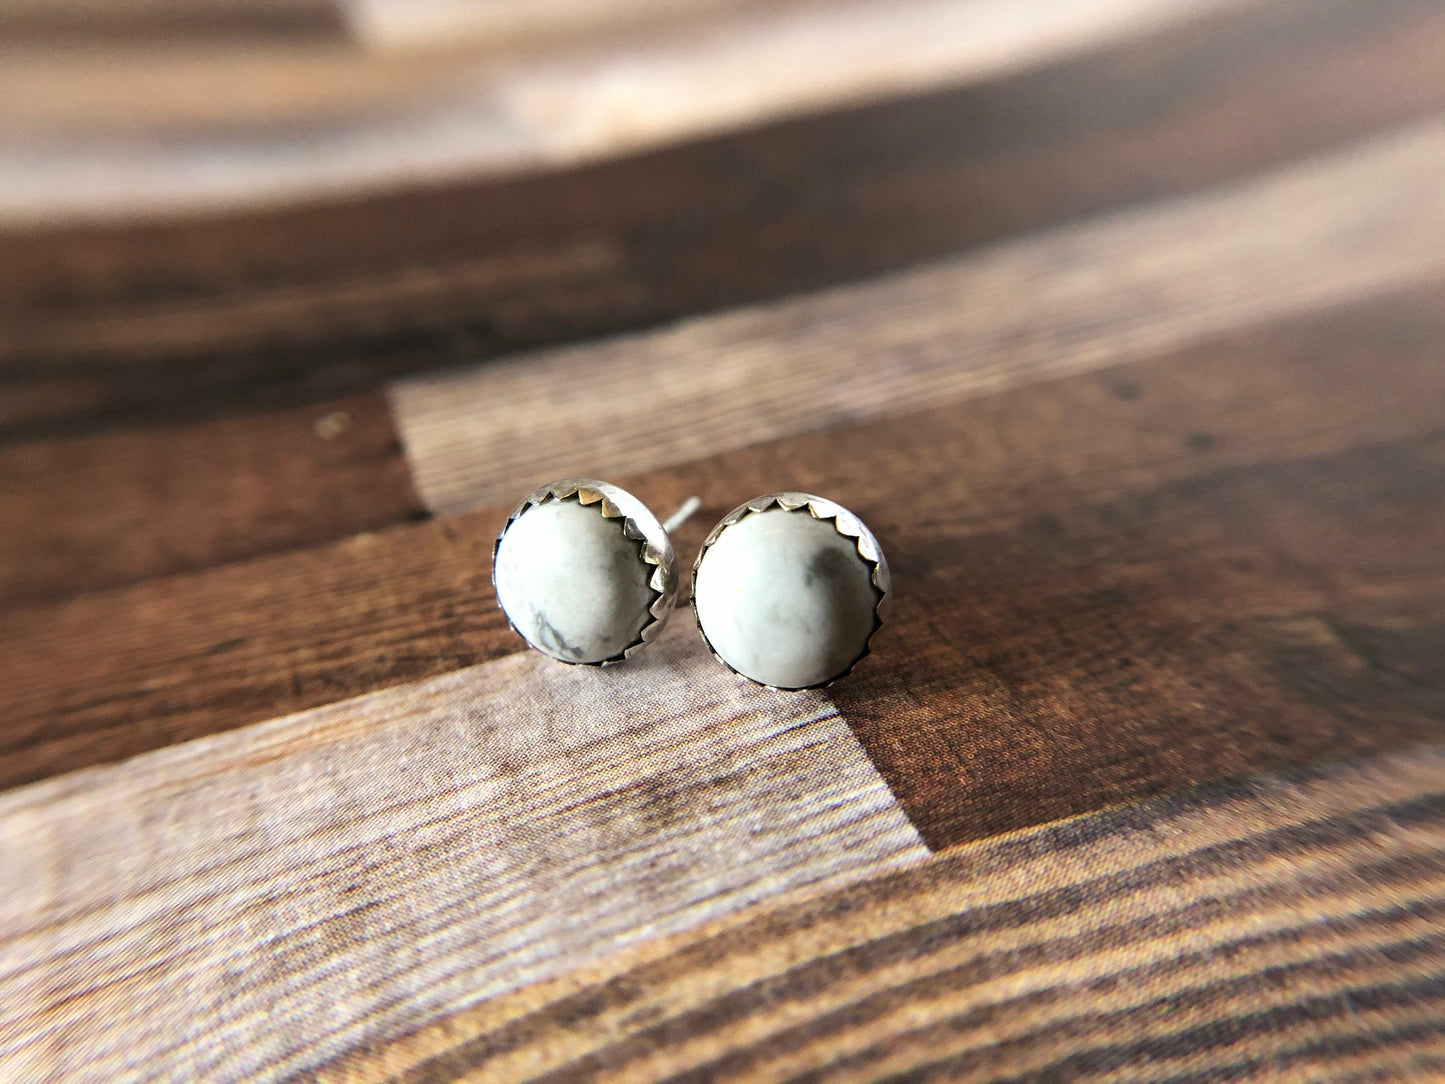 sterling-silver-studs-silver-studs-white-studs-everyday-wear-earrings-silver-white-studs-silver-simple-studs-bridesmaid-gift-gifts-for-her